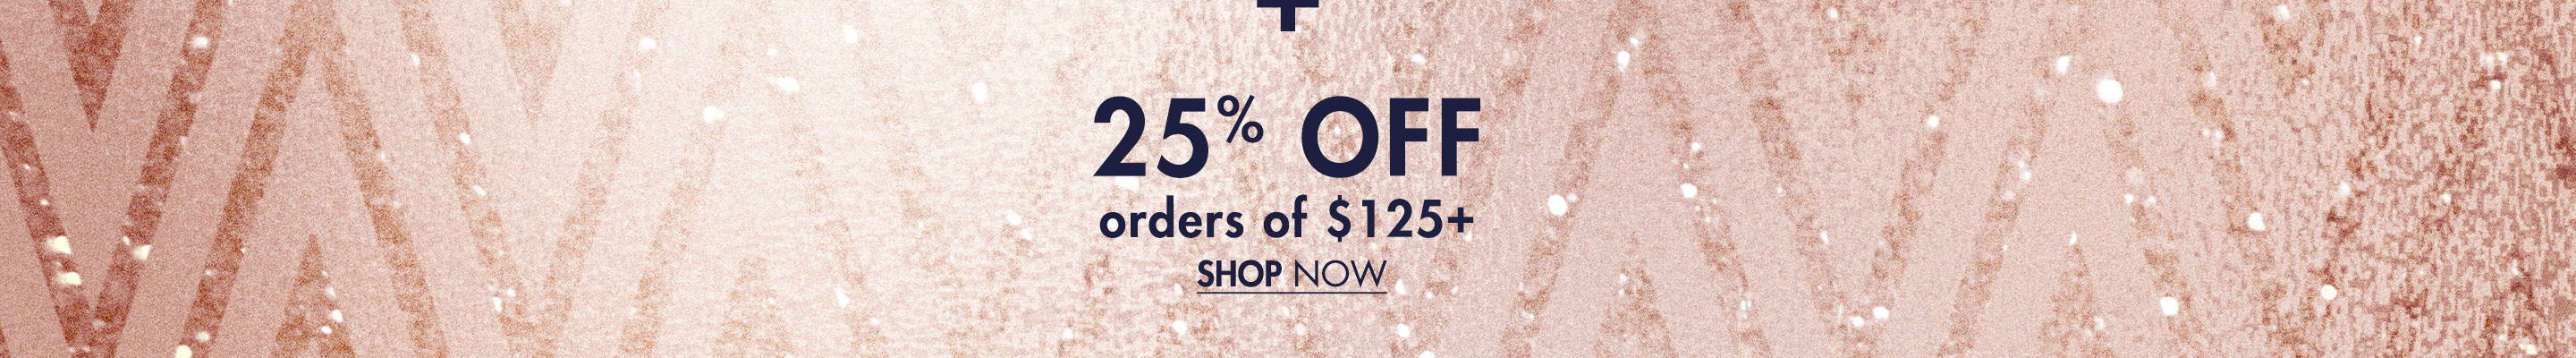 25% Off orders of $125+